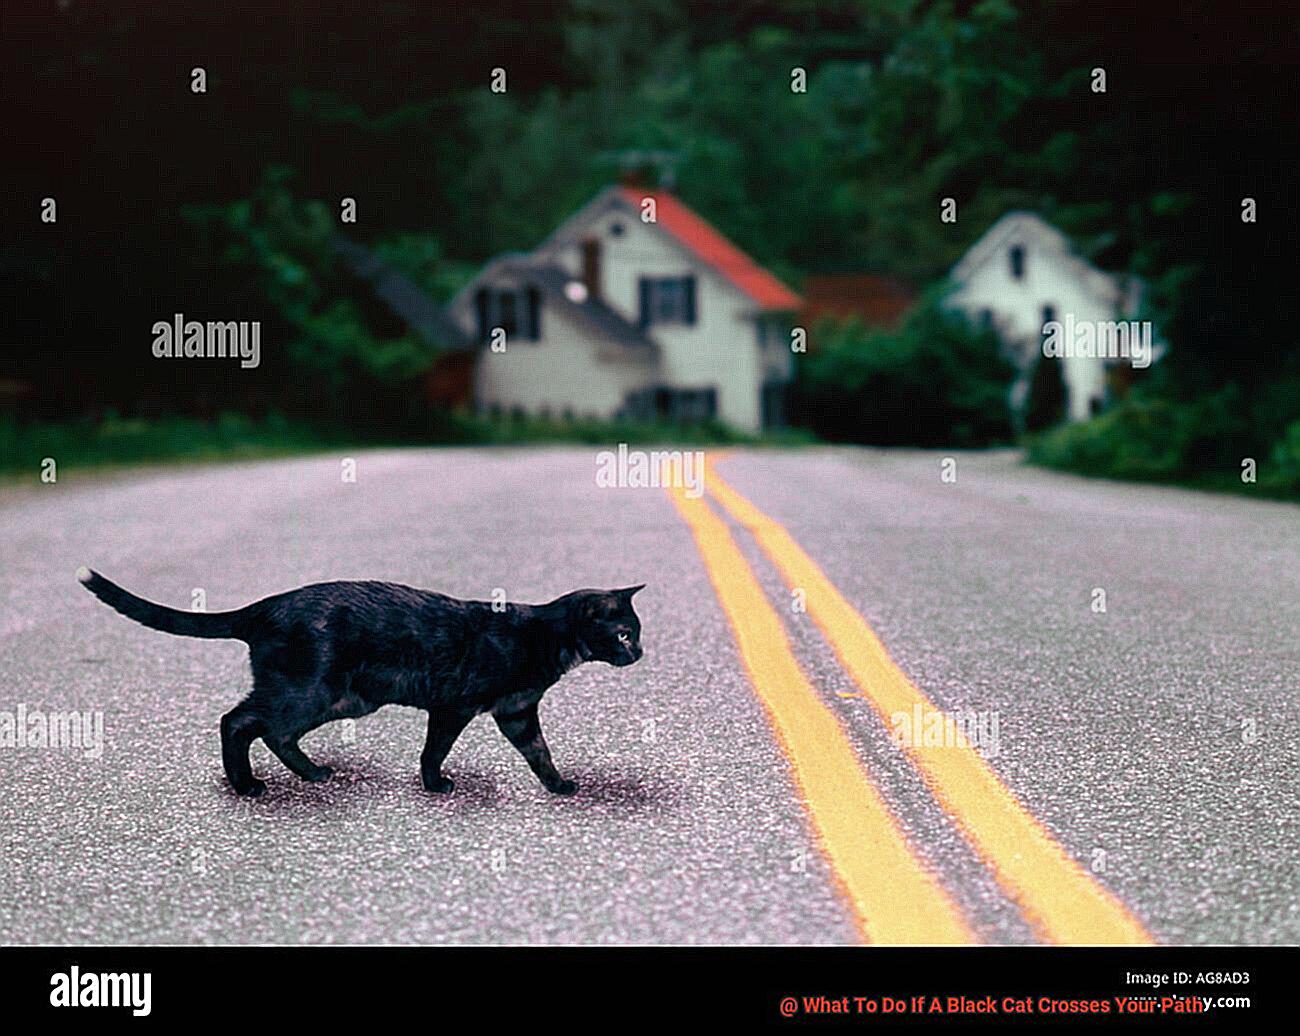 What To Do If A Black Cat Crosses Your Path-4